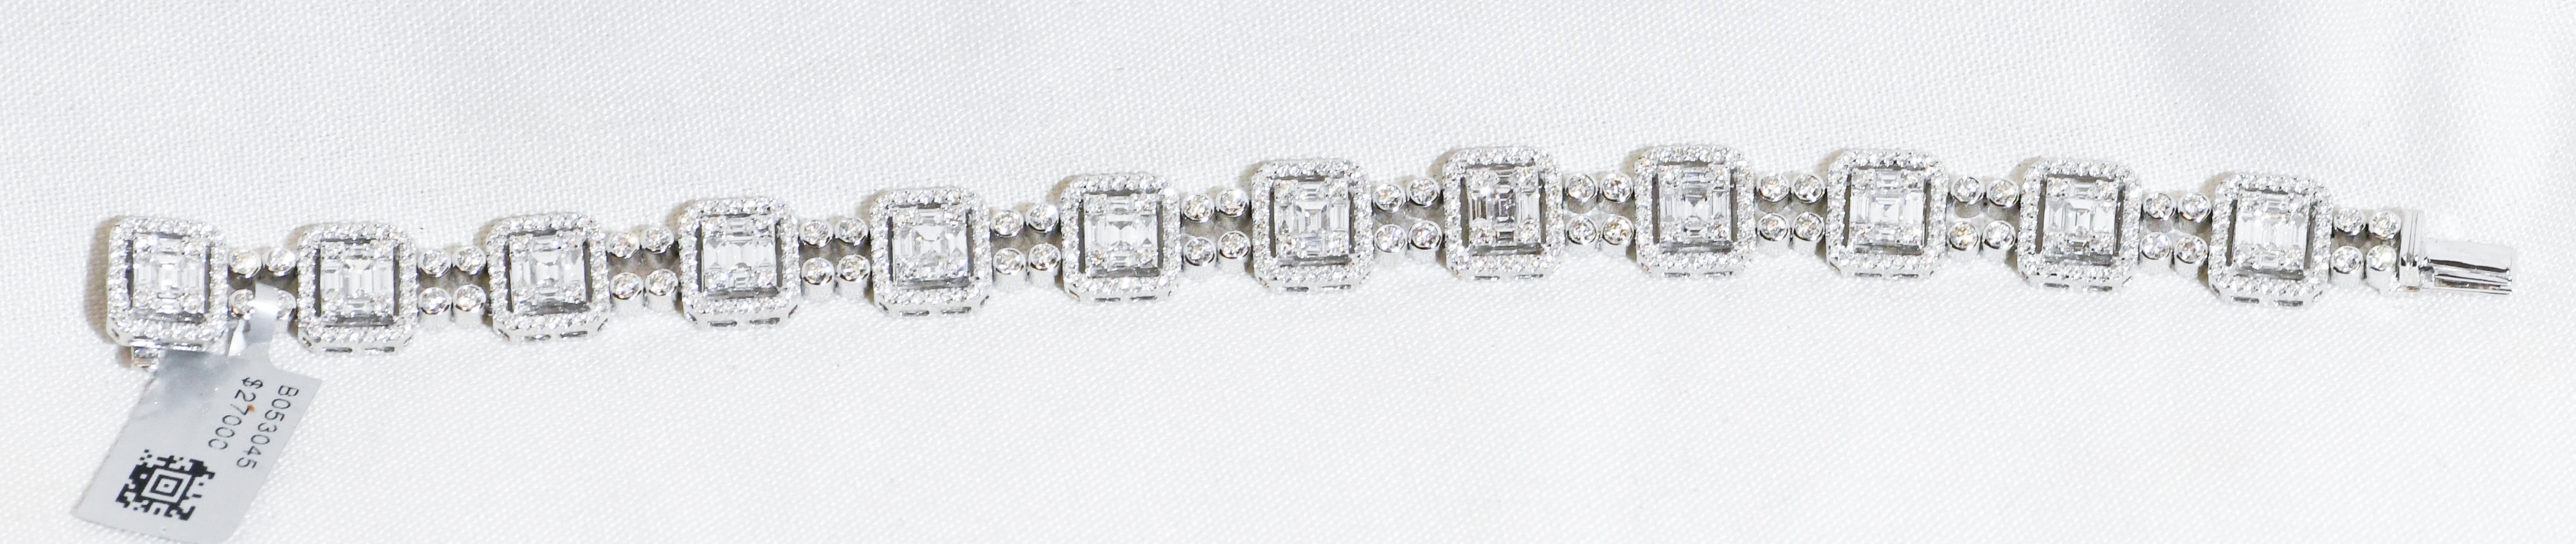 Meticulously crafted in 18 karat white gold, this stunning bracelet is genius of design.  Eleven stations appear to contain a large emerald cut diamond in the center.  Closer inspection reveals each station containing at the center a Princess cut